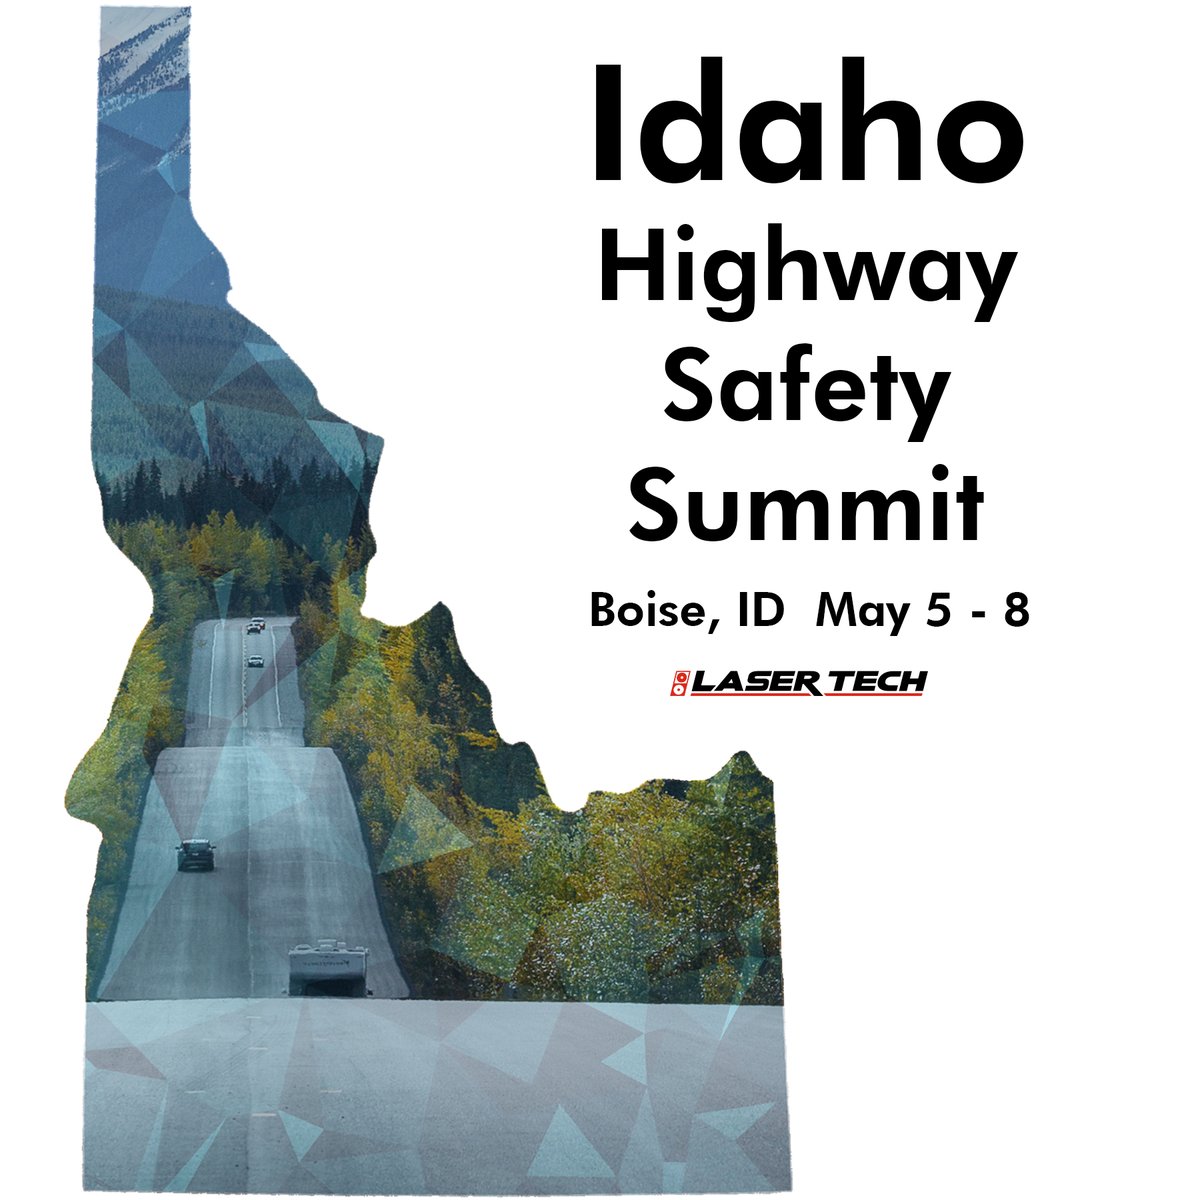 We look forward to hearing about #trafficsafety goals and initiatives from opposite sides of the country during these upcoming events: 

•Empire State Law Enforcement Traffic Safety Conference, April 24 – 25

•Idaho Highway Safety Summit, May 5- 8

#TogetherWeDriveSafety